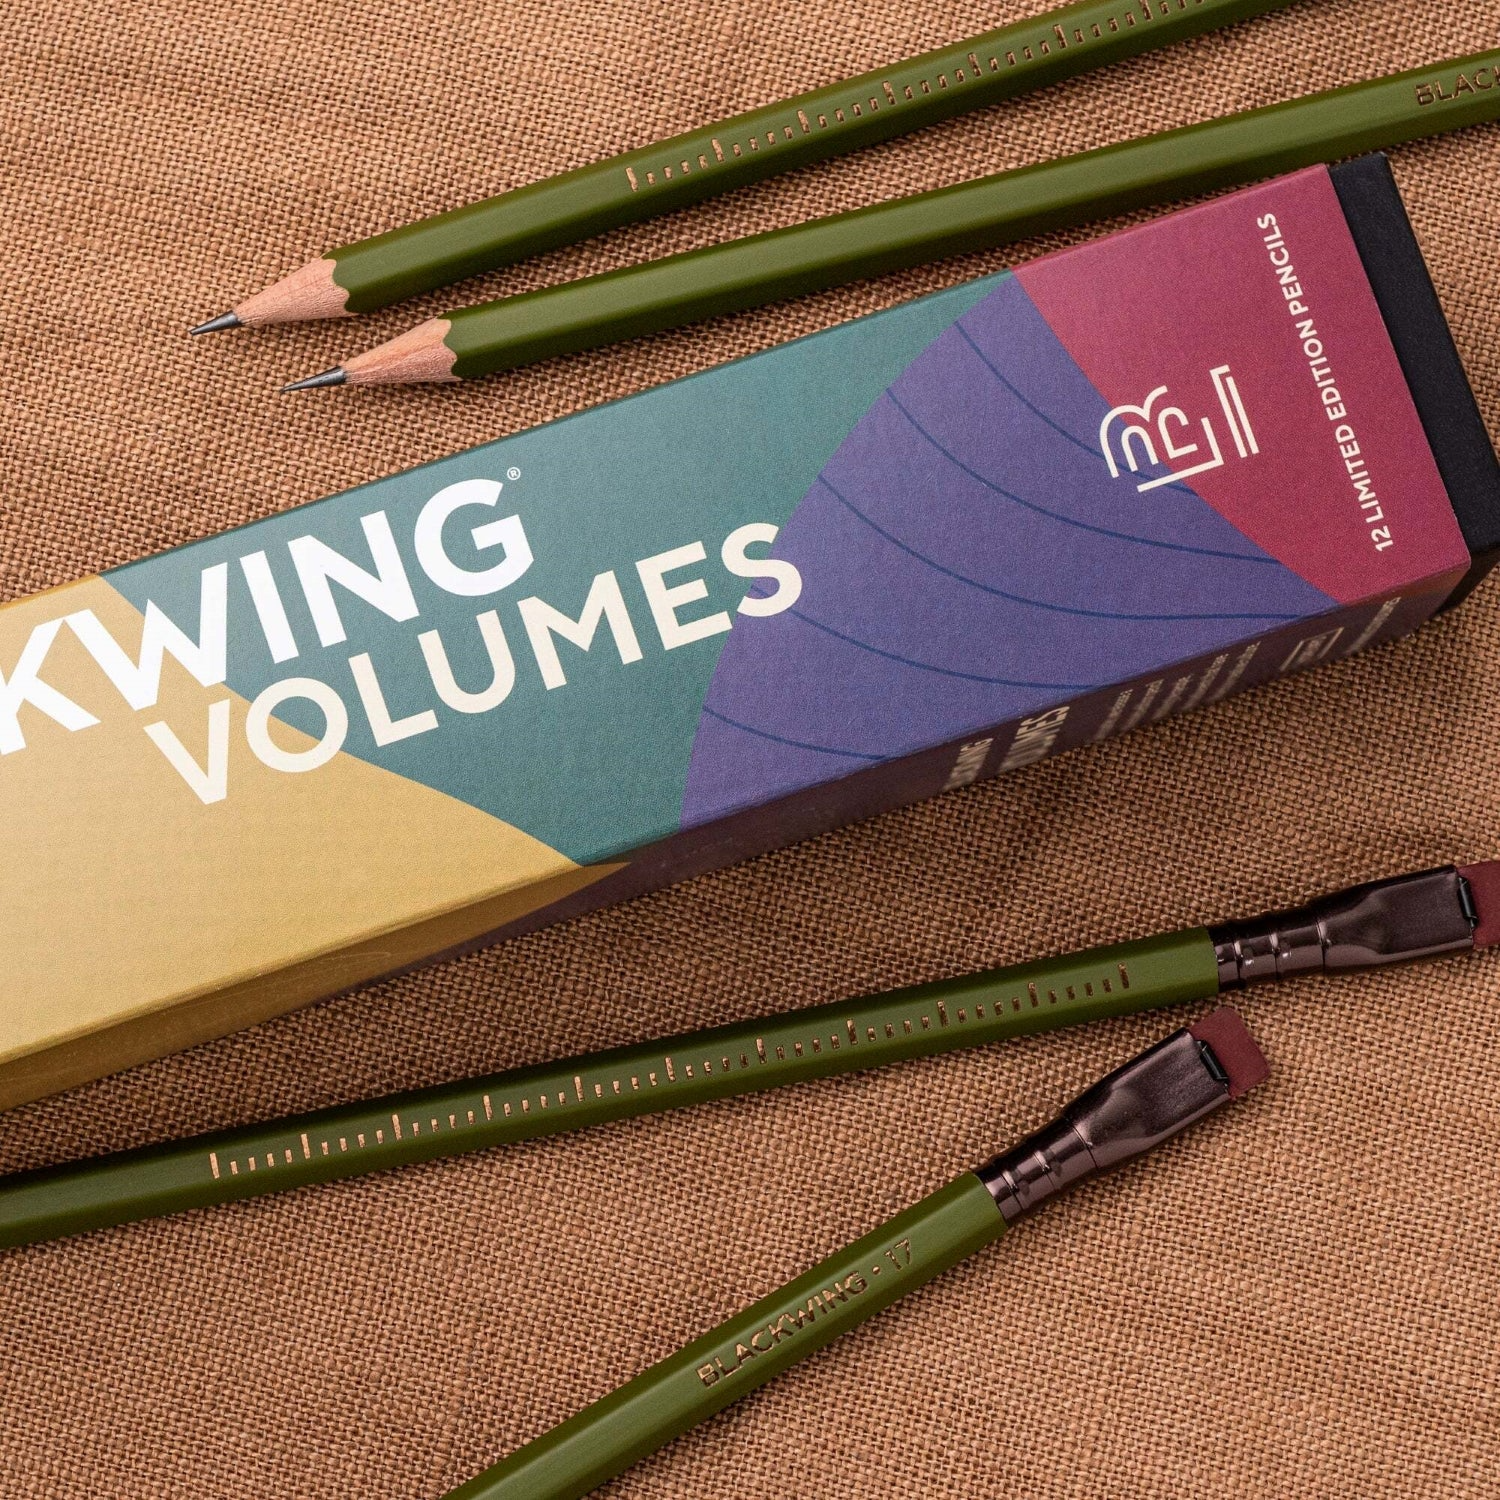 Blackwing Volume 17 Gardening - Pencraft the boutique